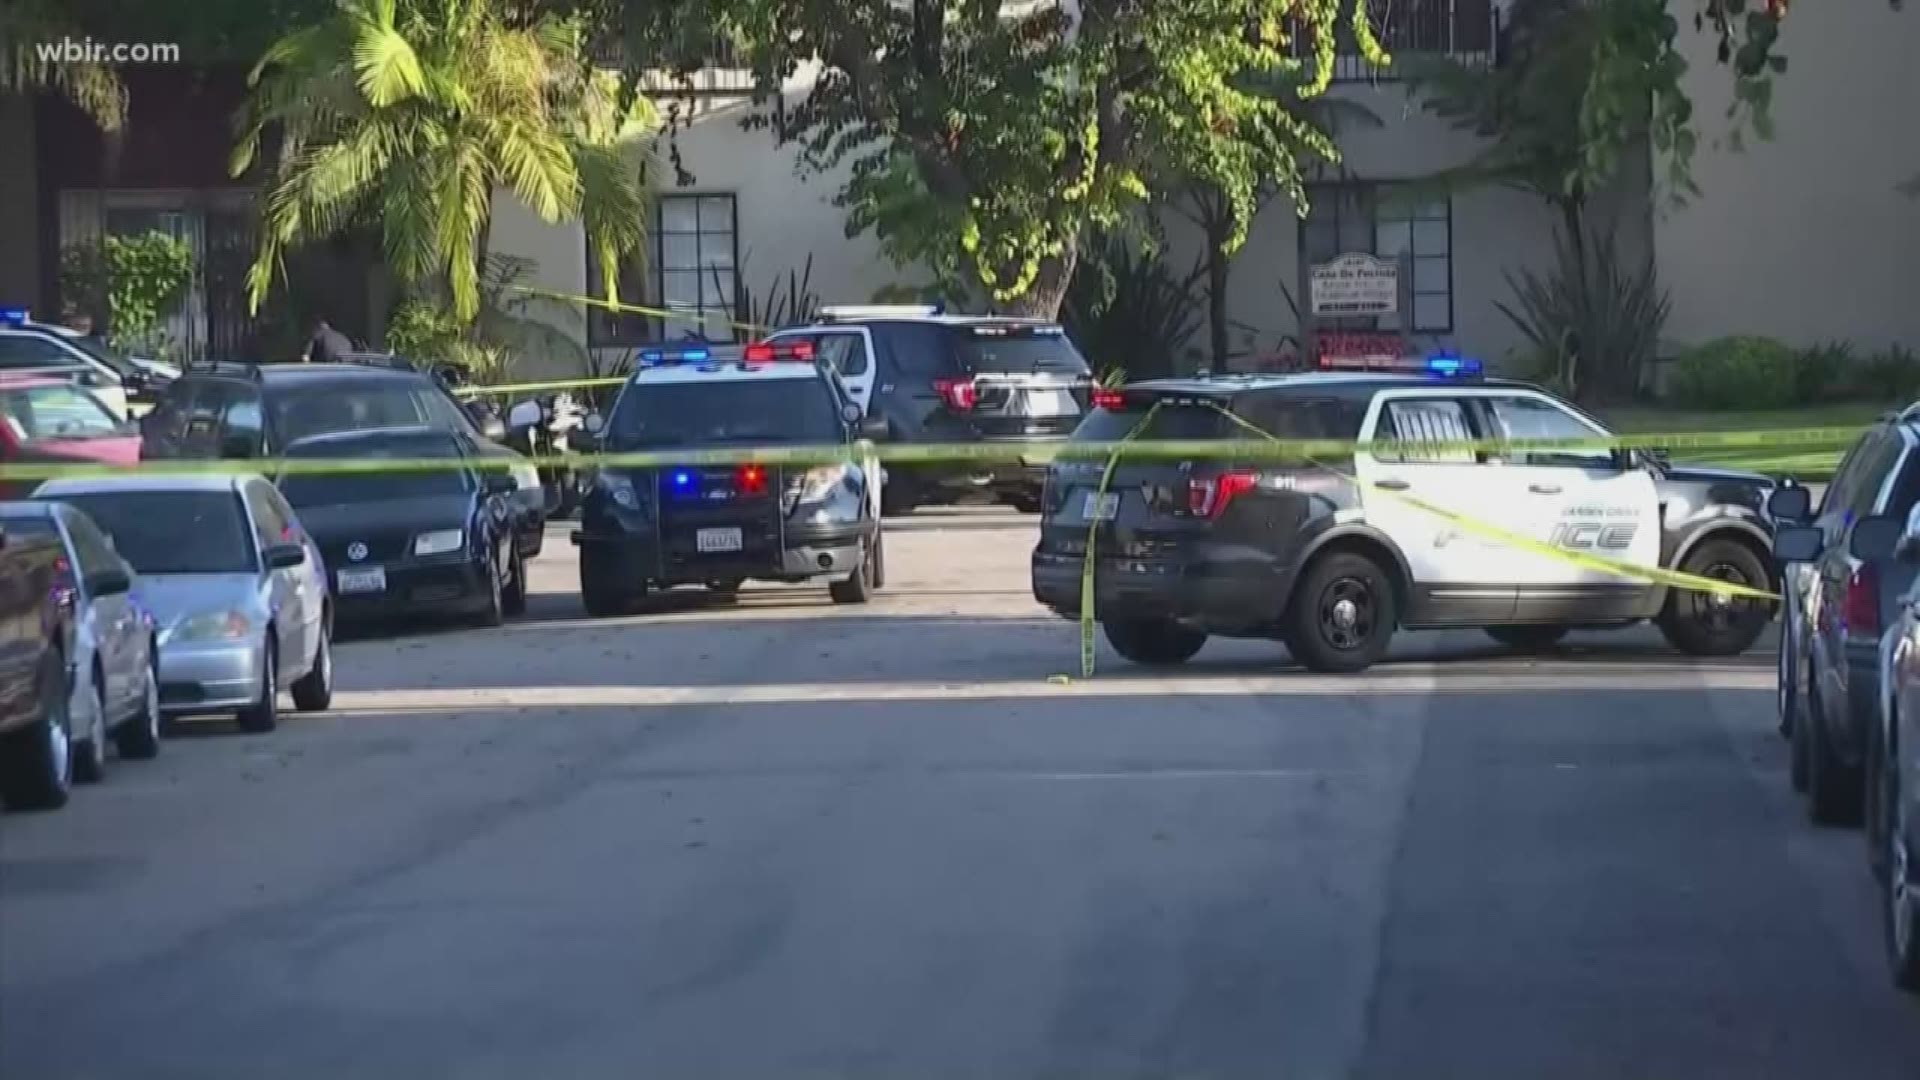 At least four people are dead after a stabbing spree in Los Angeles. A total of six people were stabbed. Police say the suspect, a 23-year-old man, went to an apartment complex, a gas station, an insurance company and a Subway restaurant during the spree.